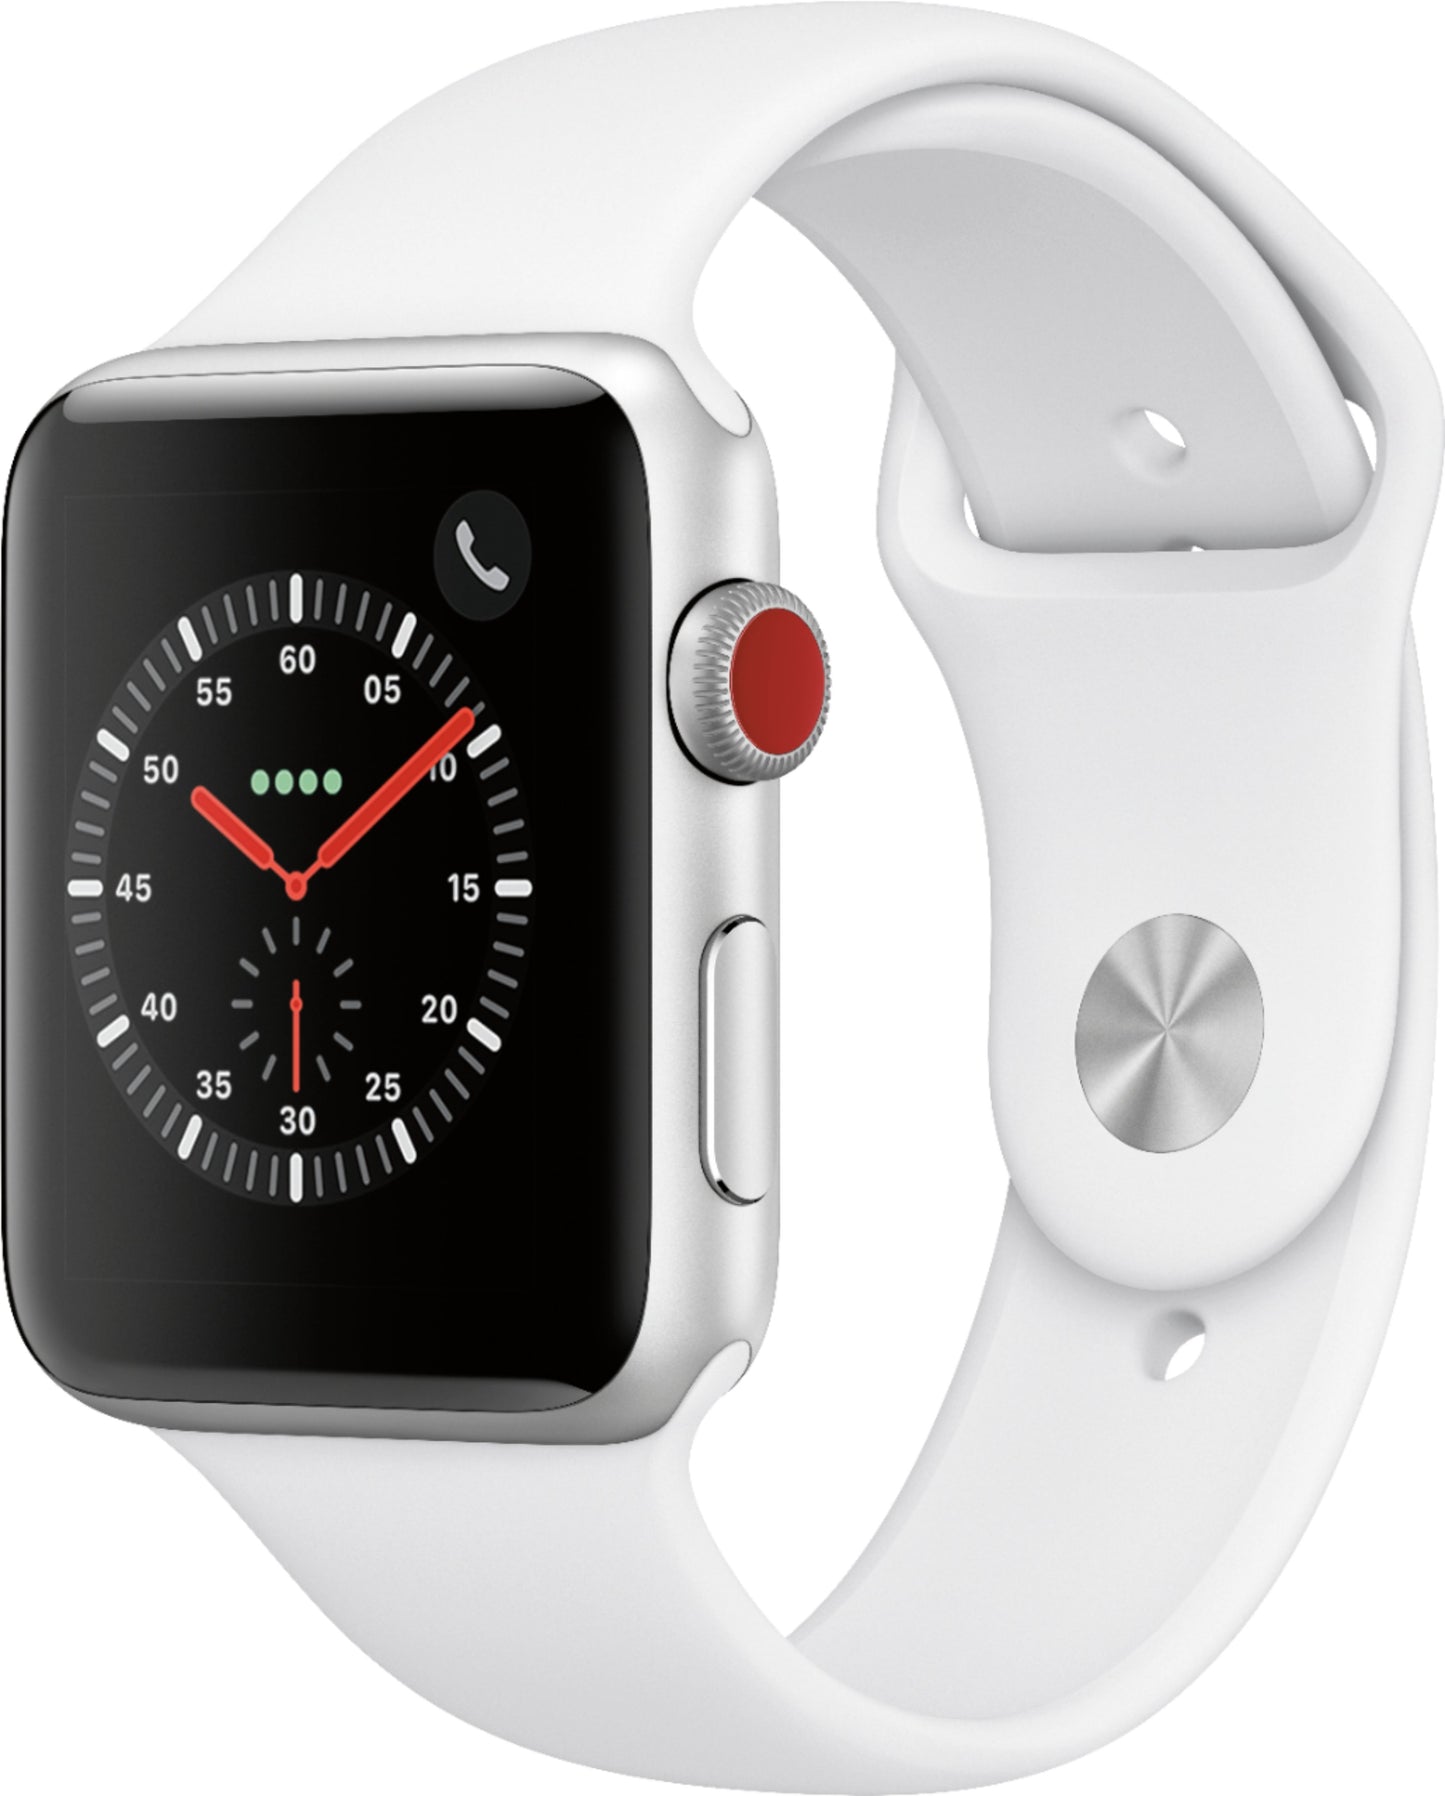 Apple Watch Series 3 (Cellular+GPS, 42MM) Silver Aluminum Case with White Sport Band (Renewed)